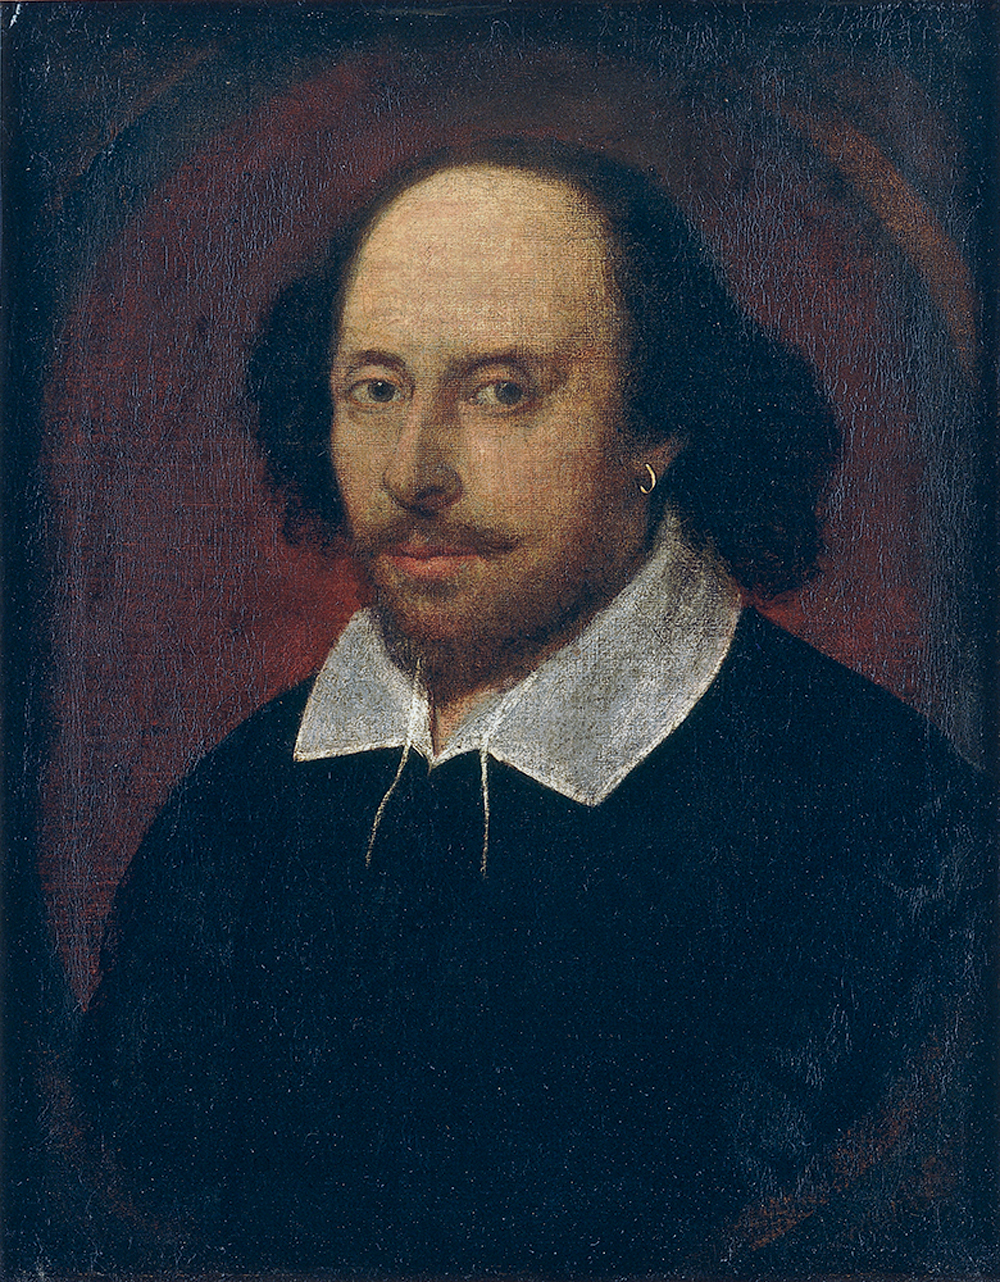 Portrait of William Shakespeare by John Taylor. Source: London’s National Portrait Gallery